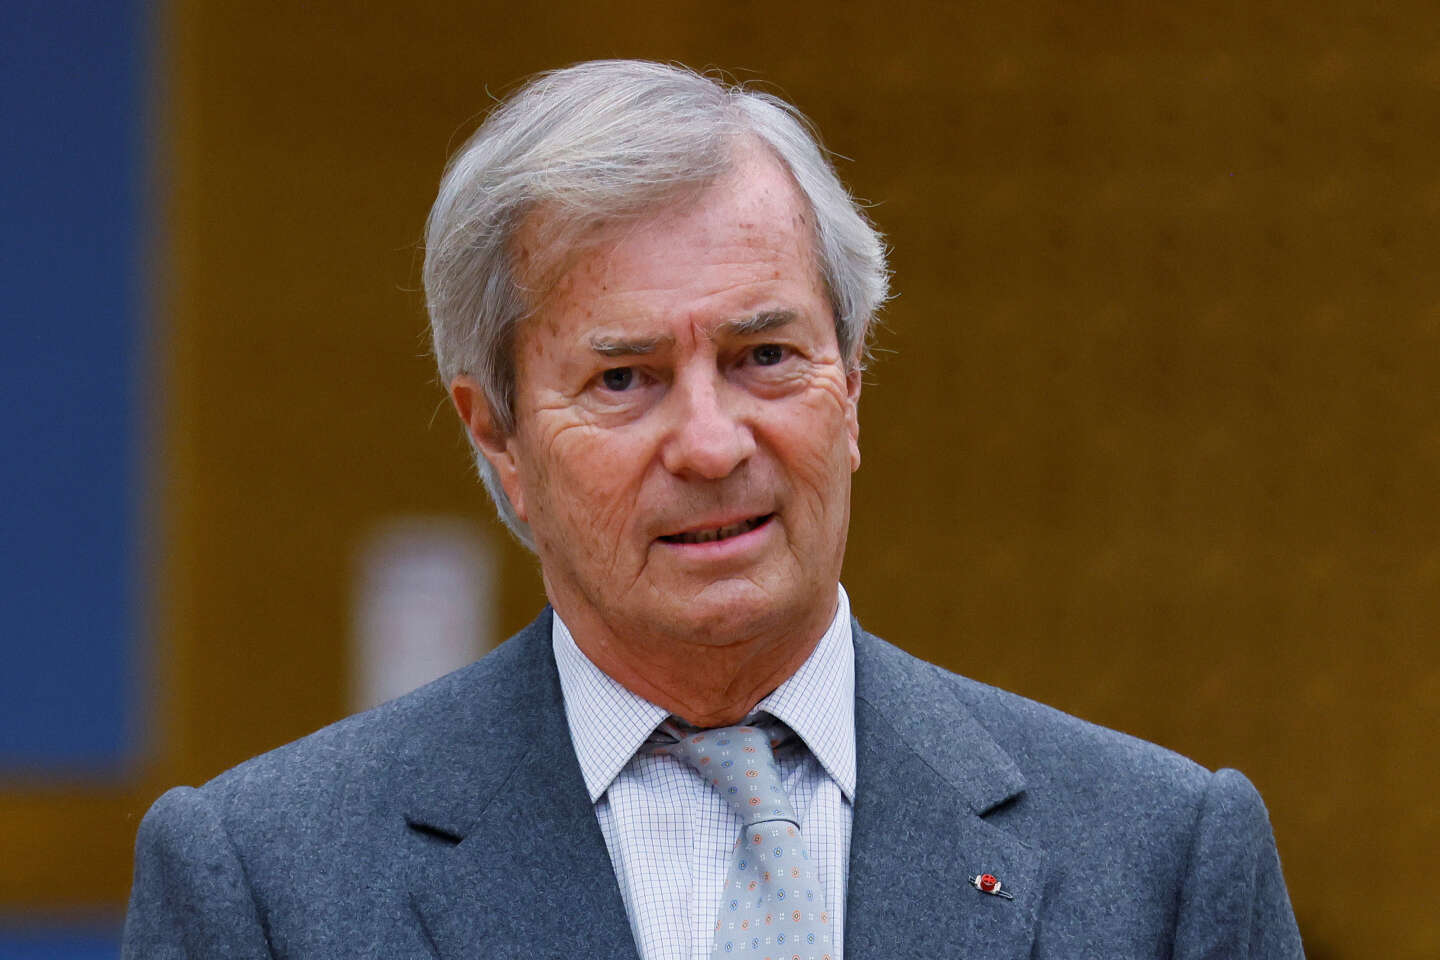 Vincent Bolloré’s admission of guilt withdrawn from the file